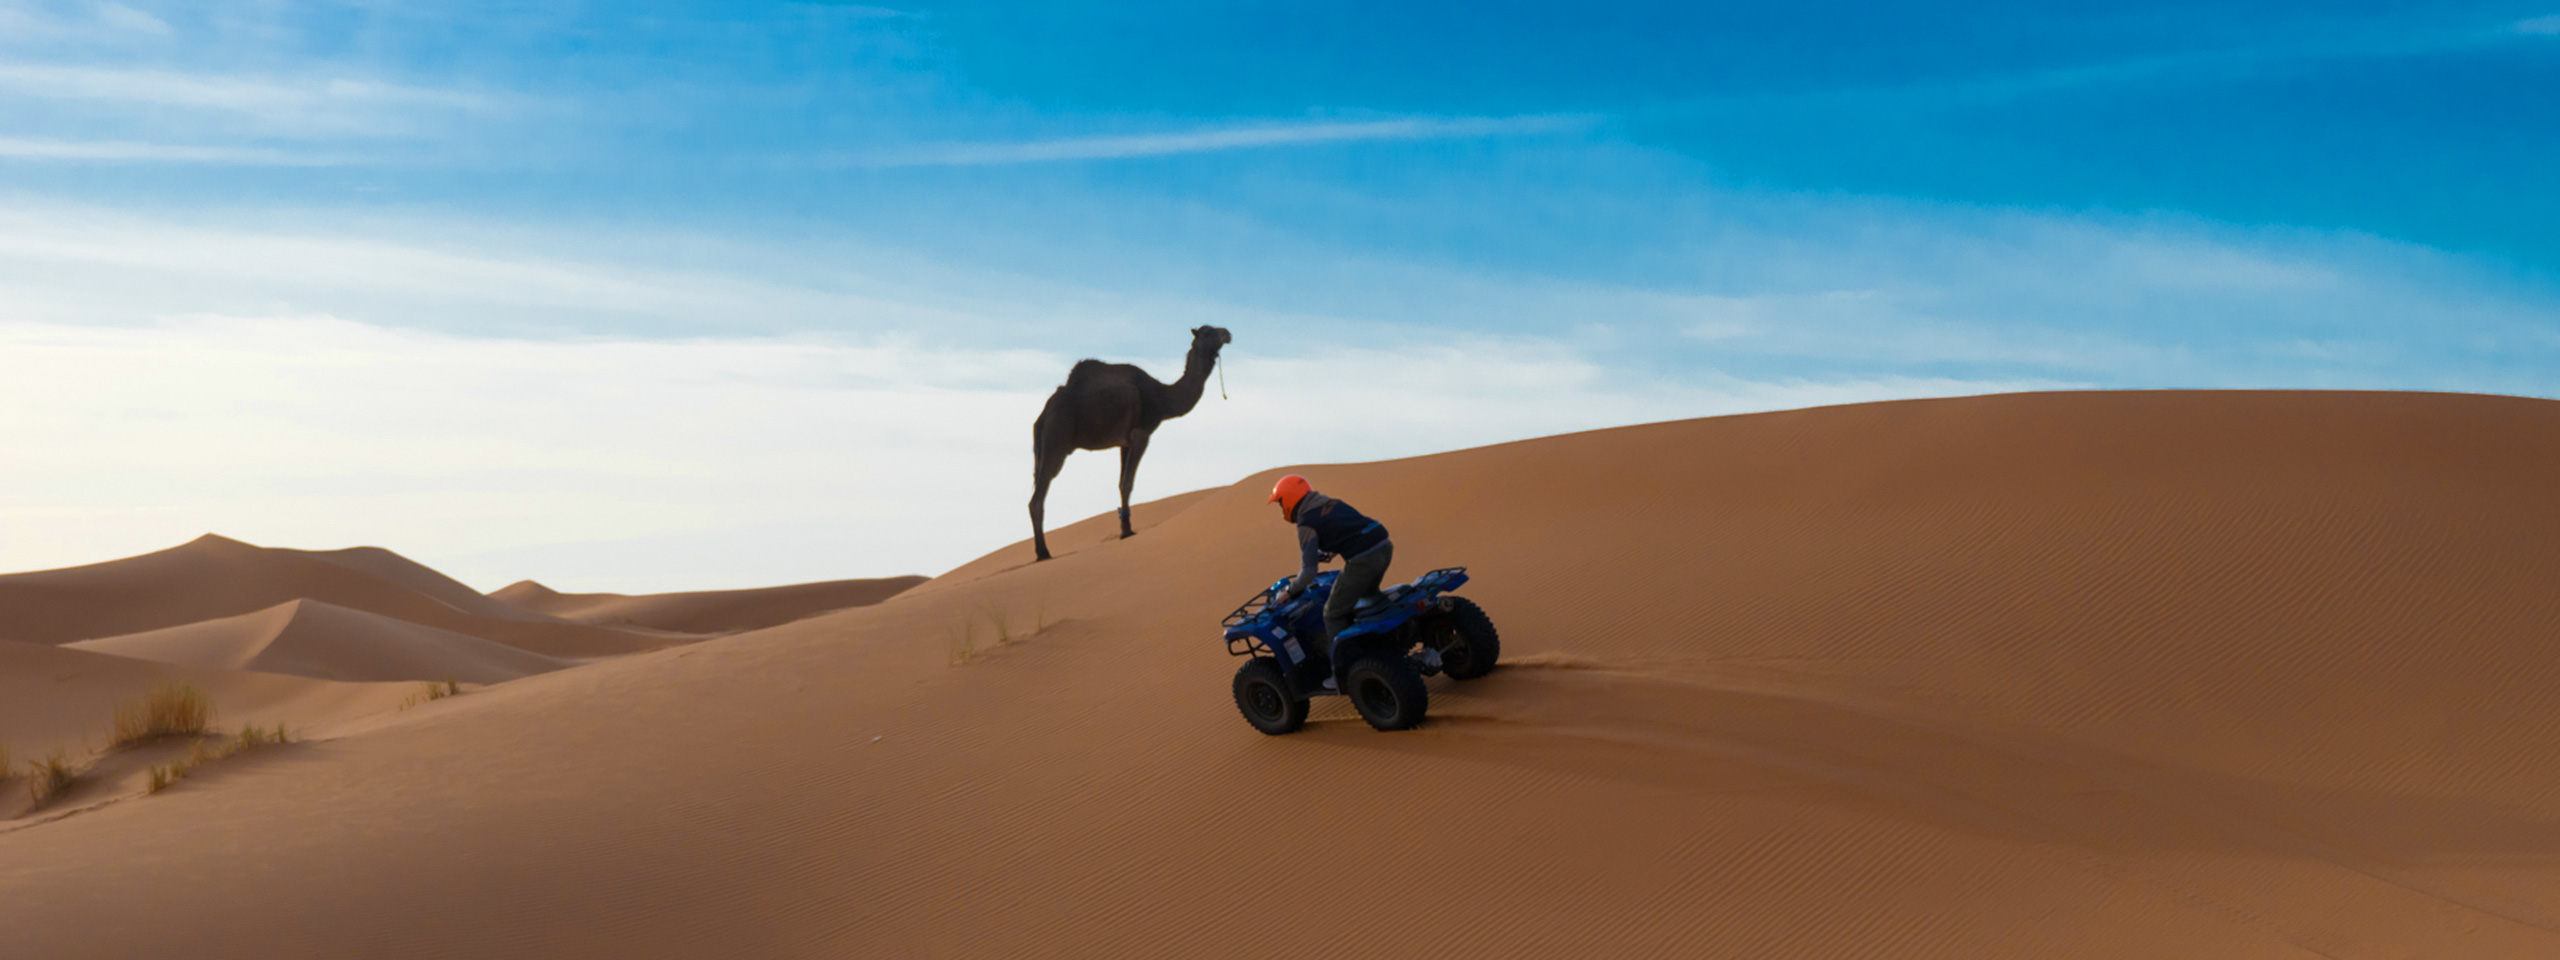 Excursions in Morocco